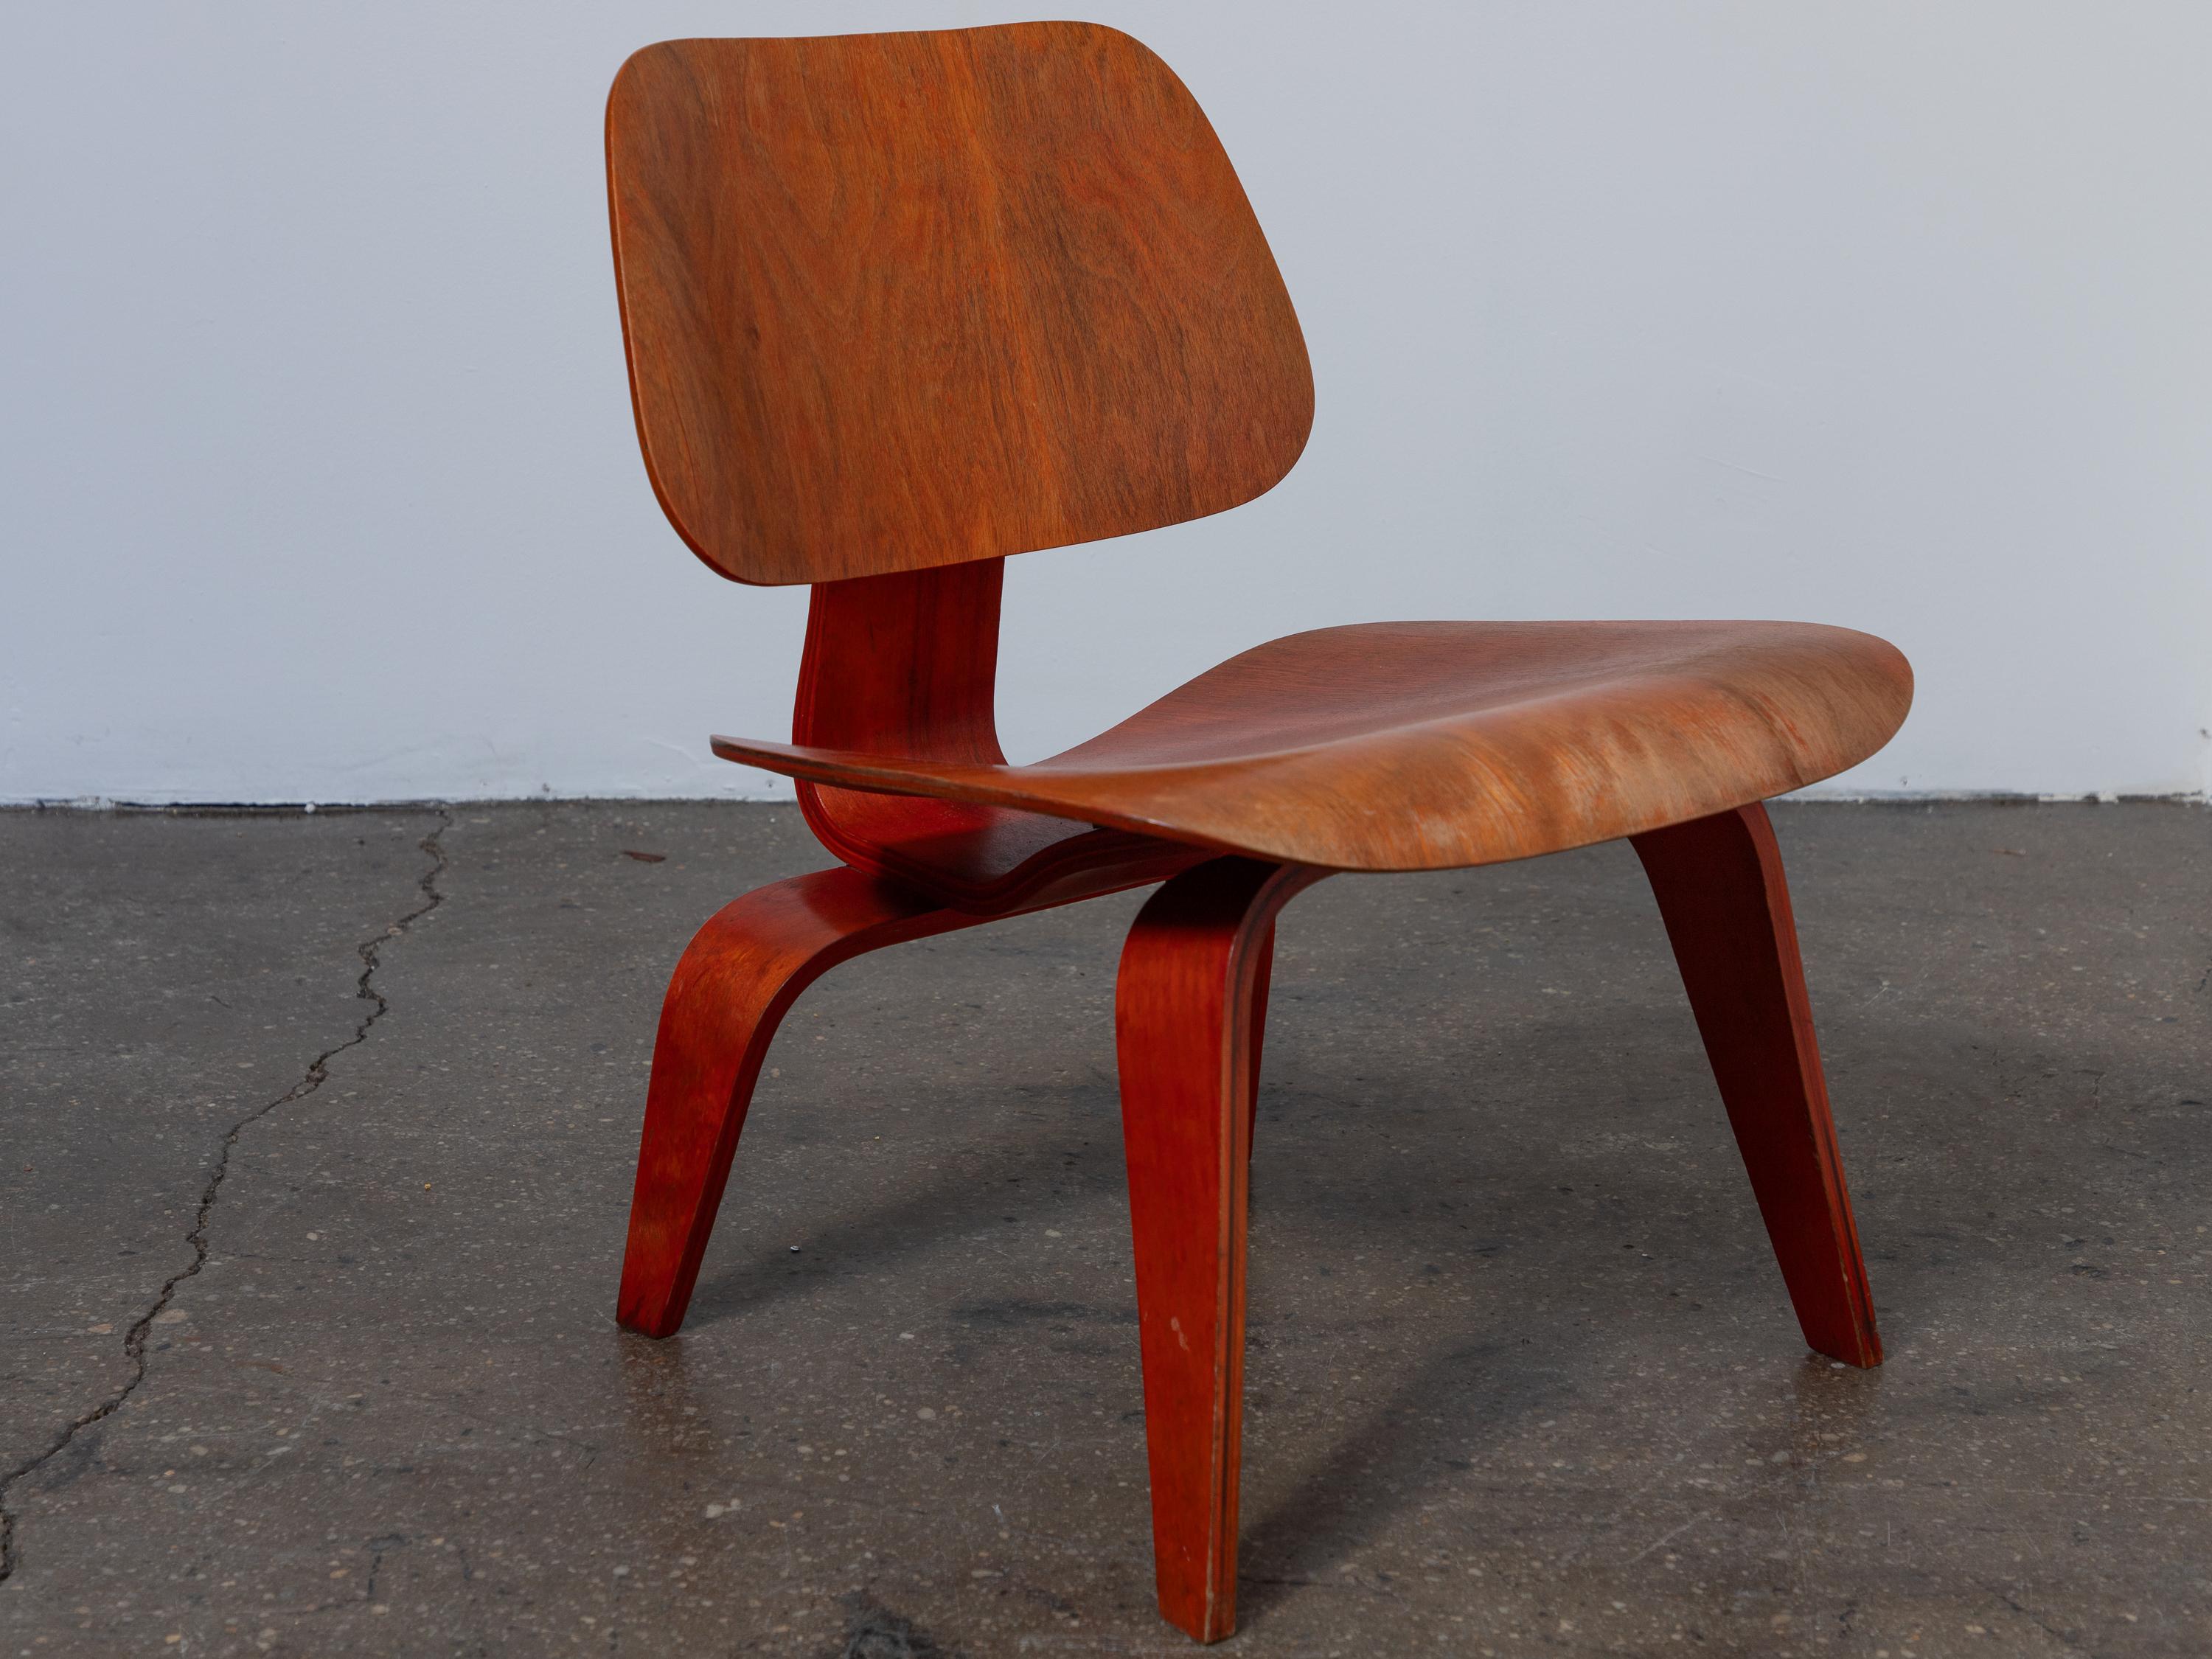 Eames Evans Red Aniline Dye LCW Lounge Chairs - Matched Pair   In Good Condition For Sale In Brooklyn, NY